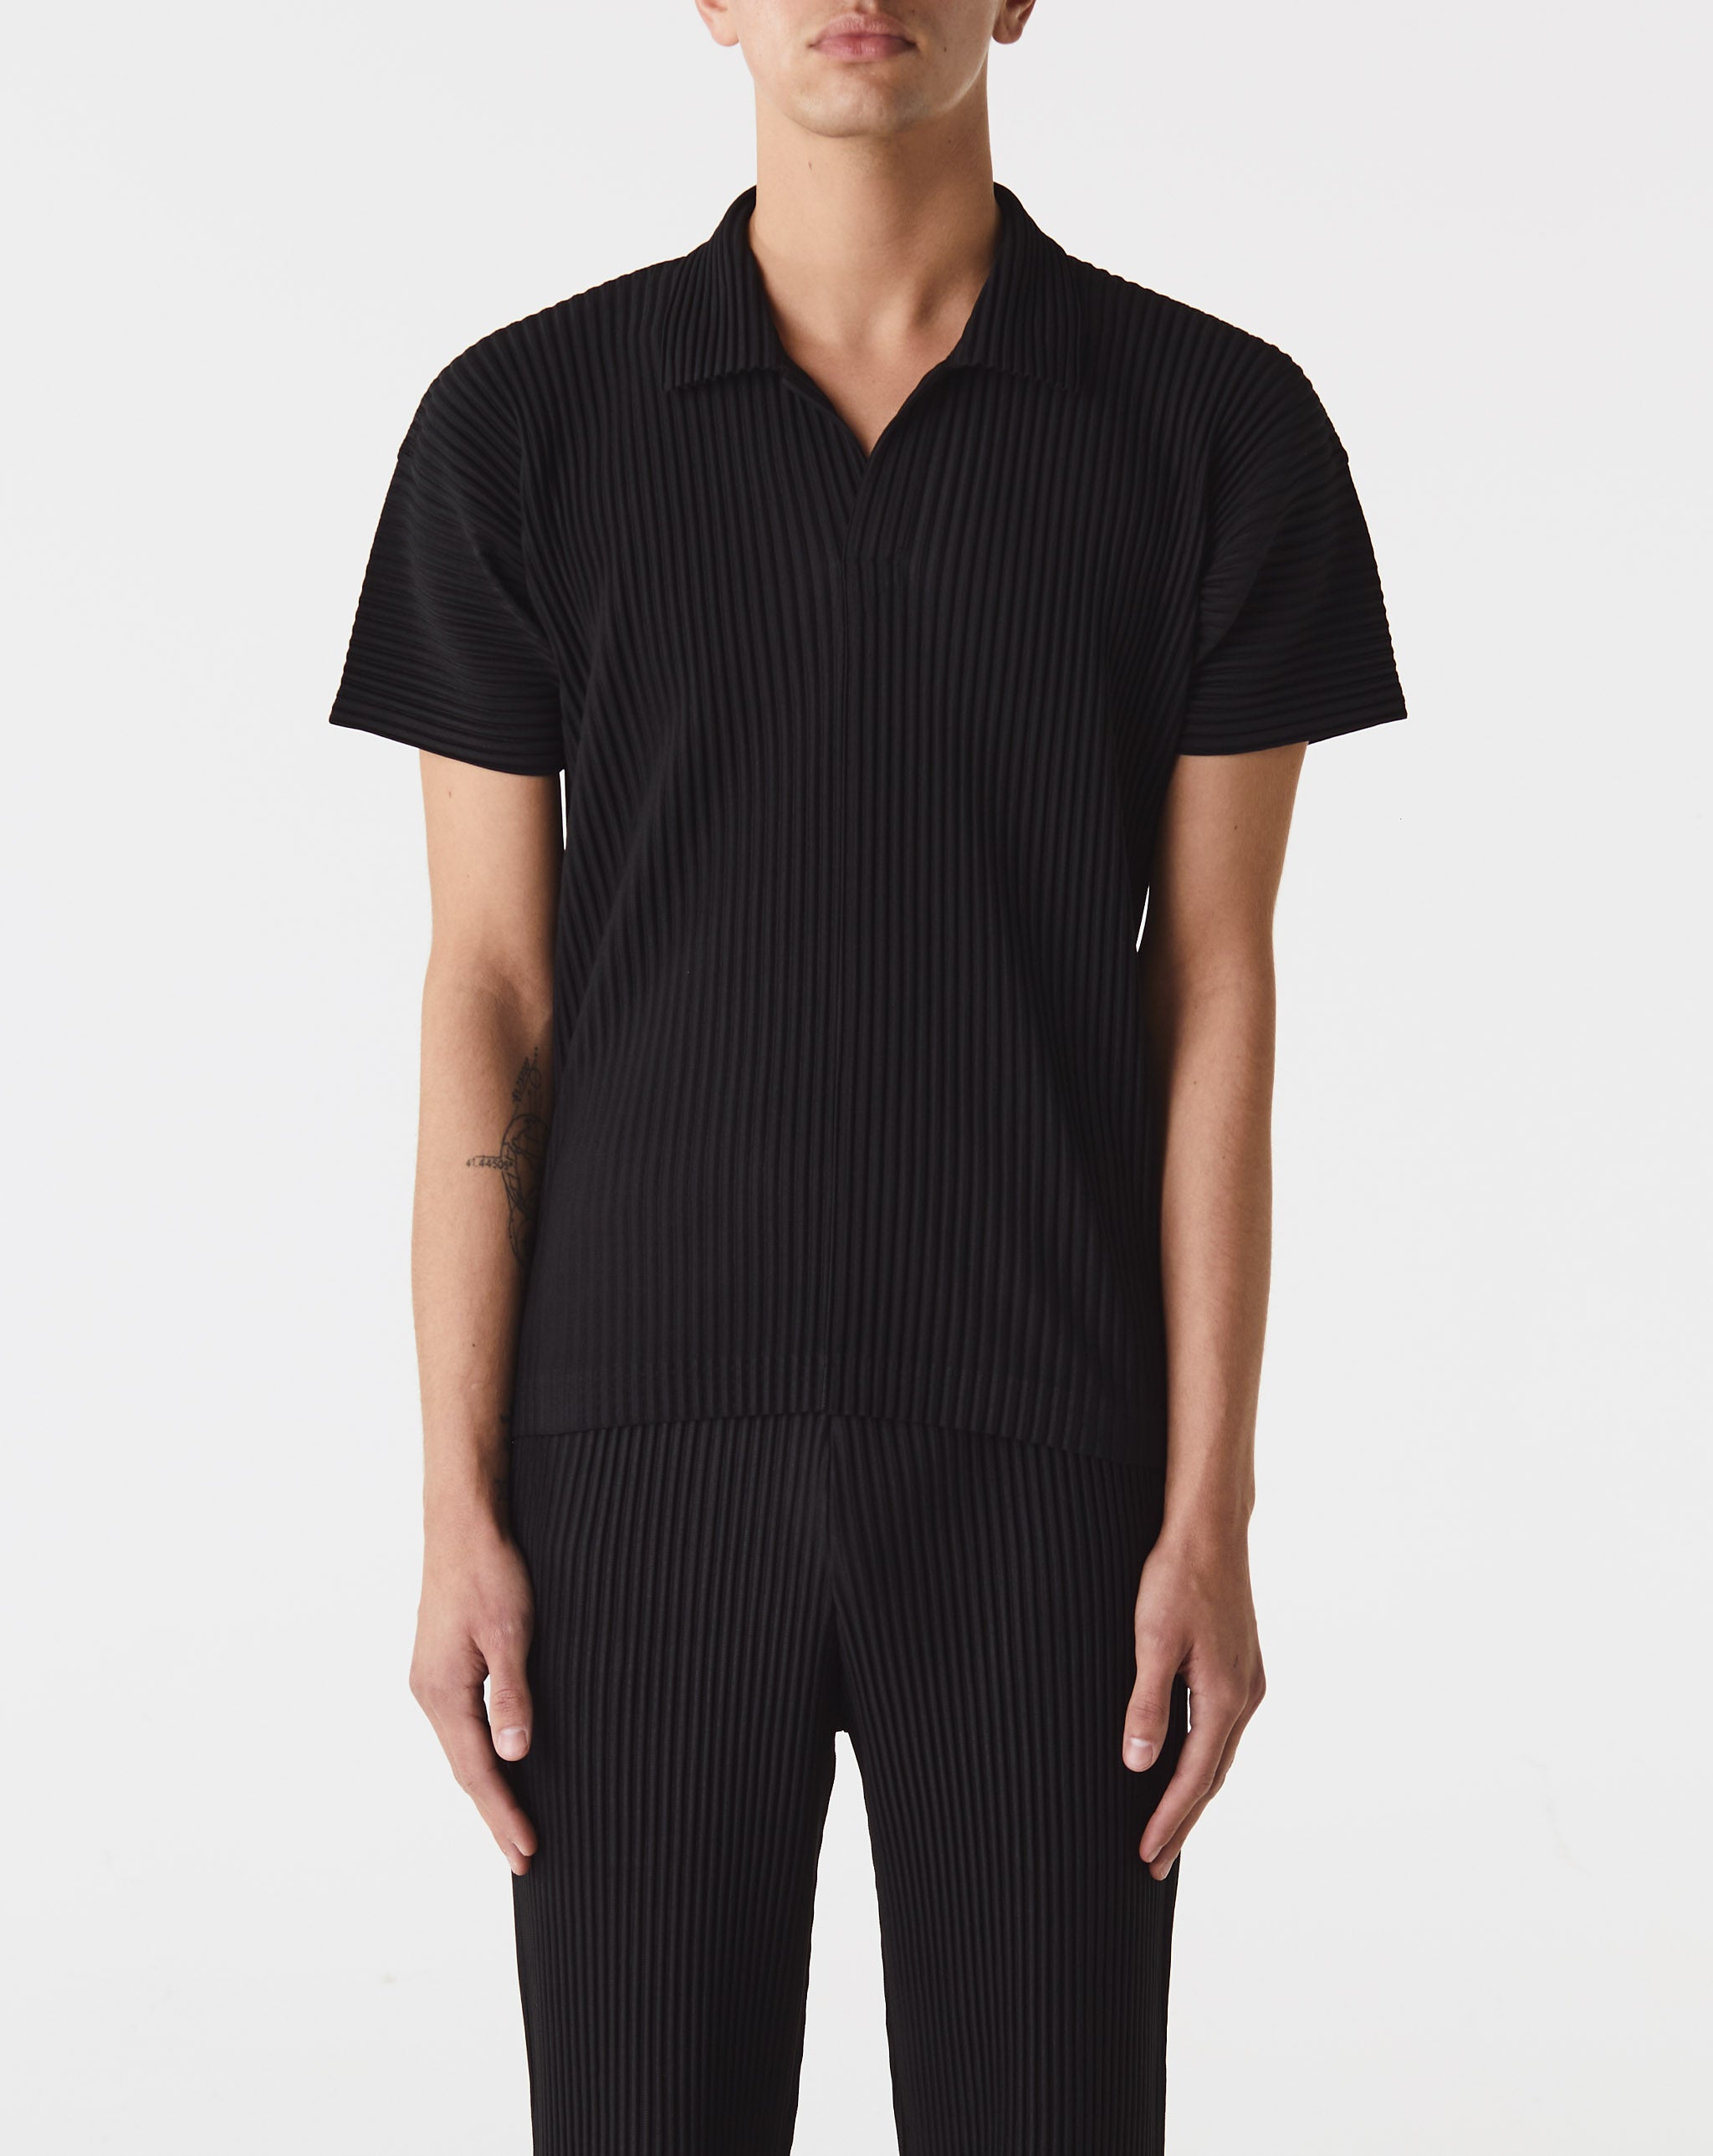 Who Decides War Basic Pleated Polo  - Cheap Atelier-lumieres Jordan outlet